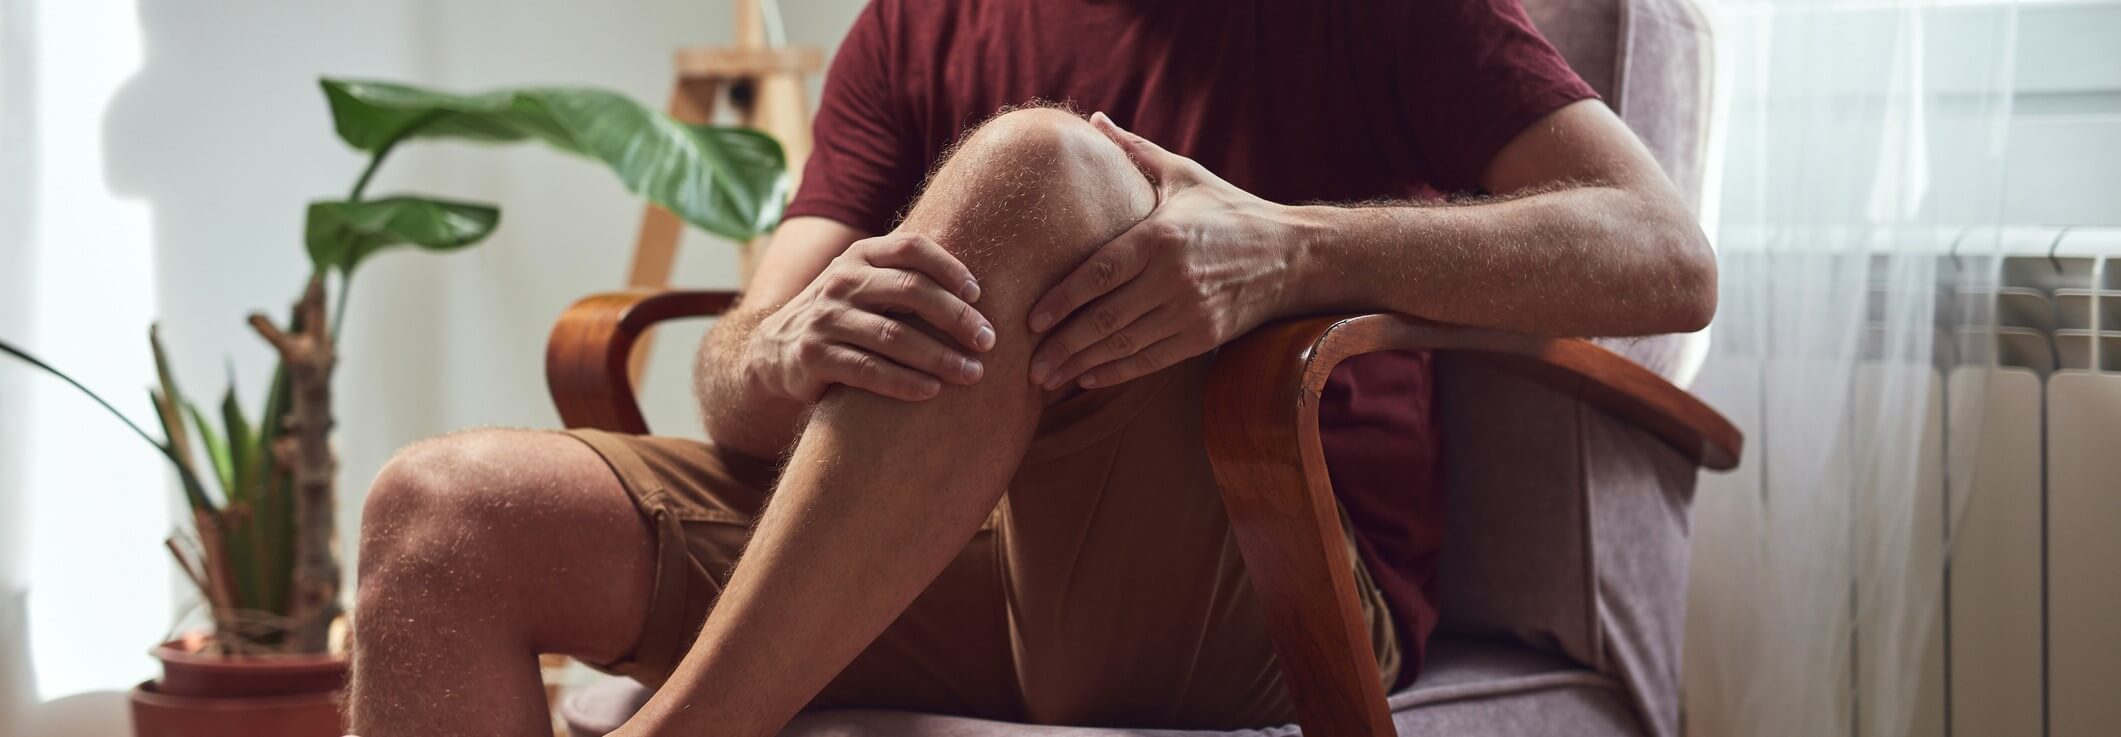 A senior man holds his knee from patella alta